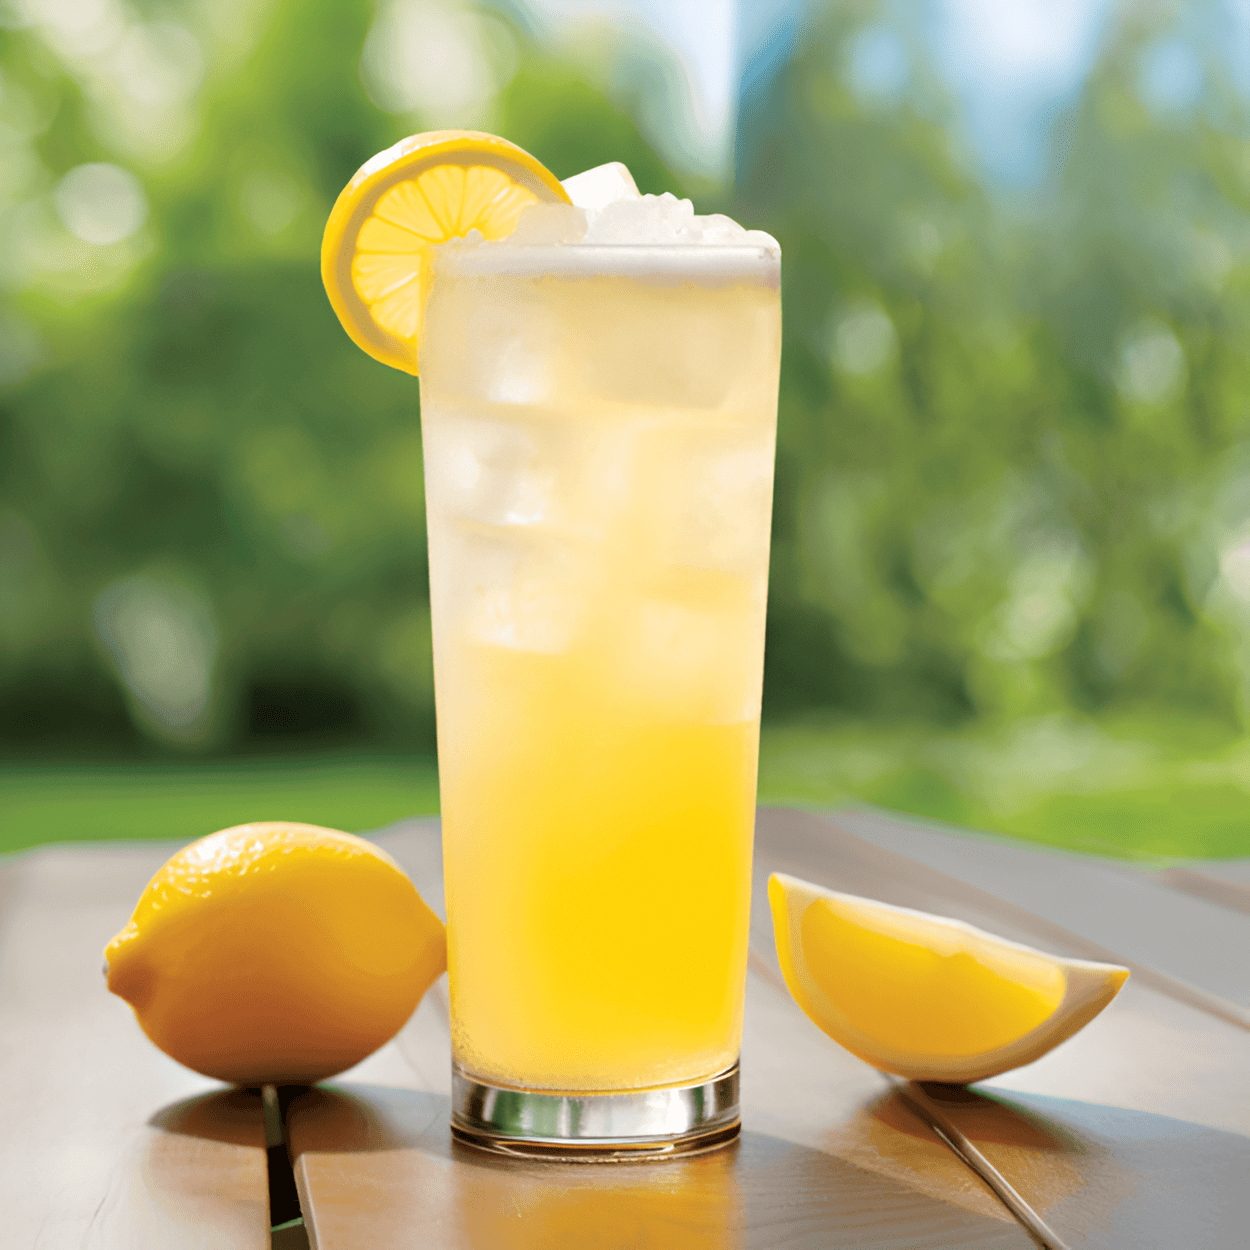 The Radler has a light, refreshing taste. It's a bit sweet from the lemon soda, with a slight bitterness from the beer. The citrus notes from the lemon make it tangy and zesty, while the carbonation gives it a nice fizz.